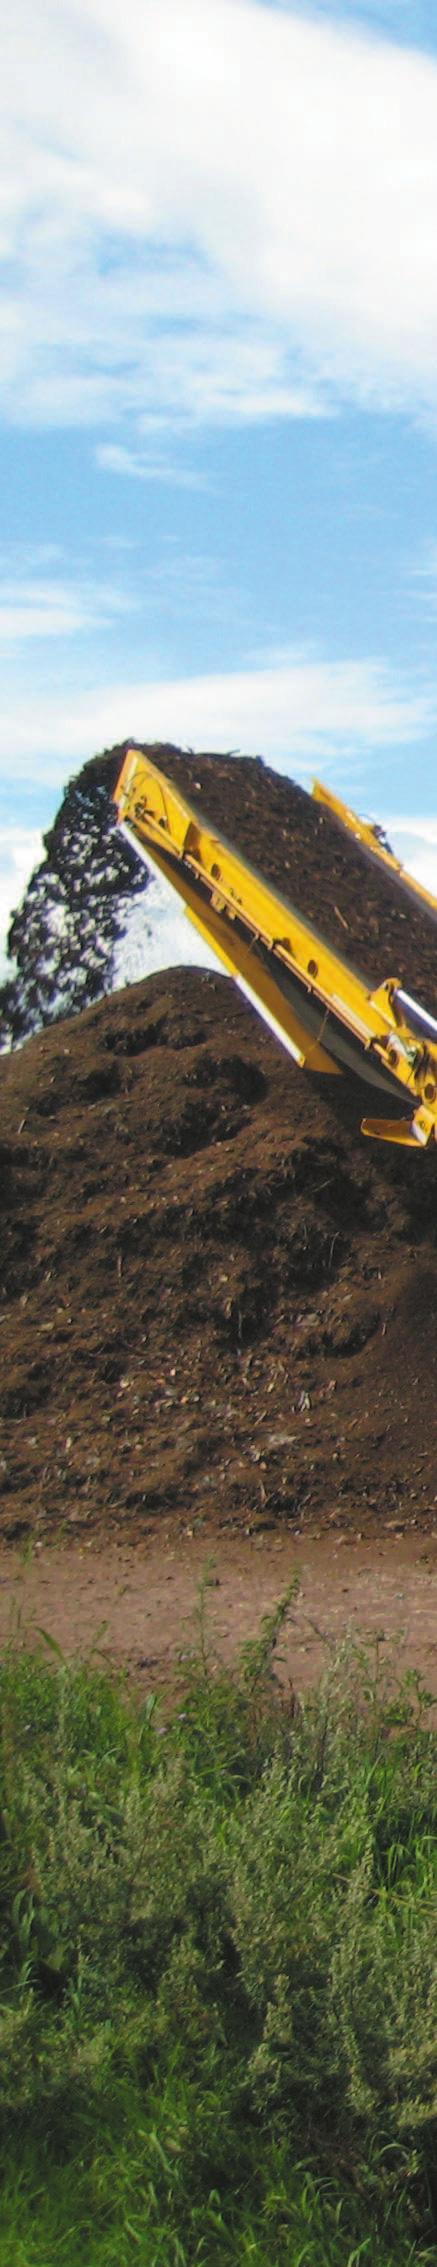 Reduce, Recycle. The HG6000 and HG6000TX horizontal grinders from Vermeer offer productivity and efficiency for your organic and wood waste recycling needs.